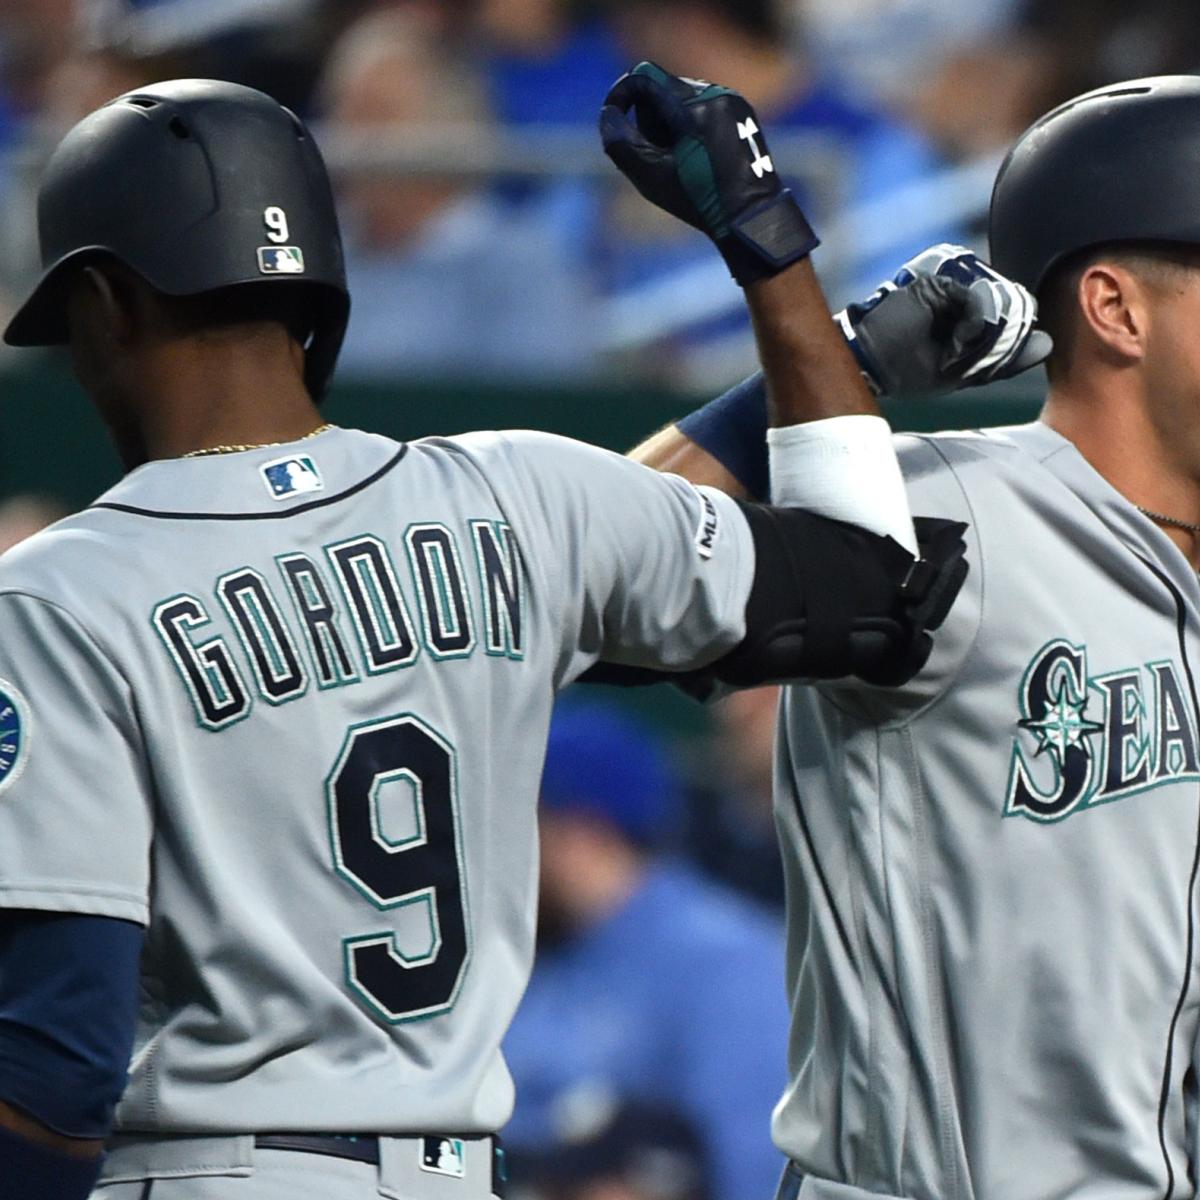 Mariners Break MLB Record with HR in 15th Straight Game to Open Season